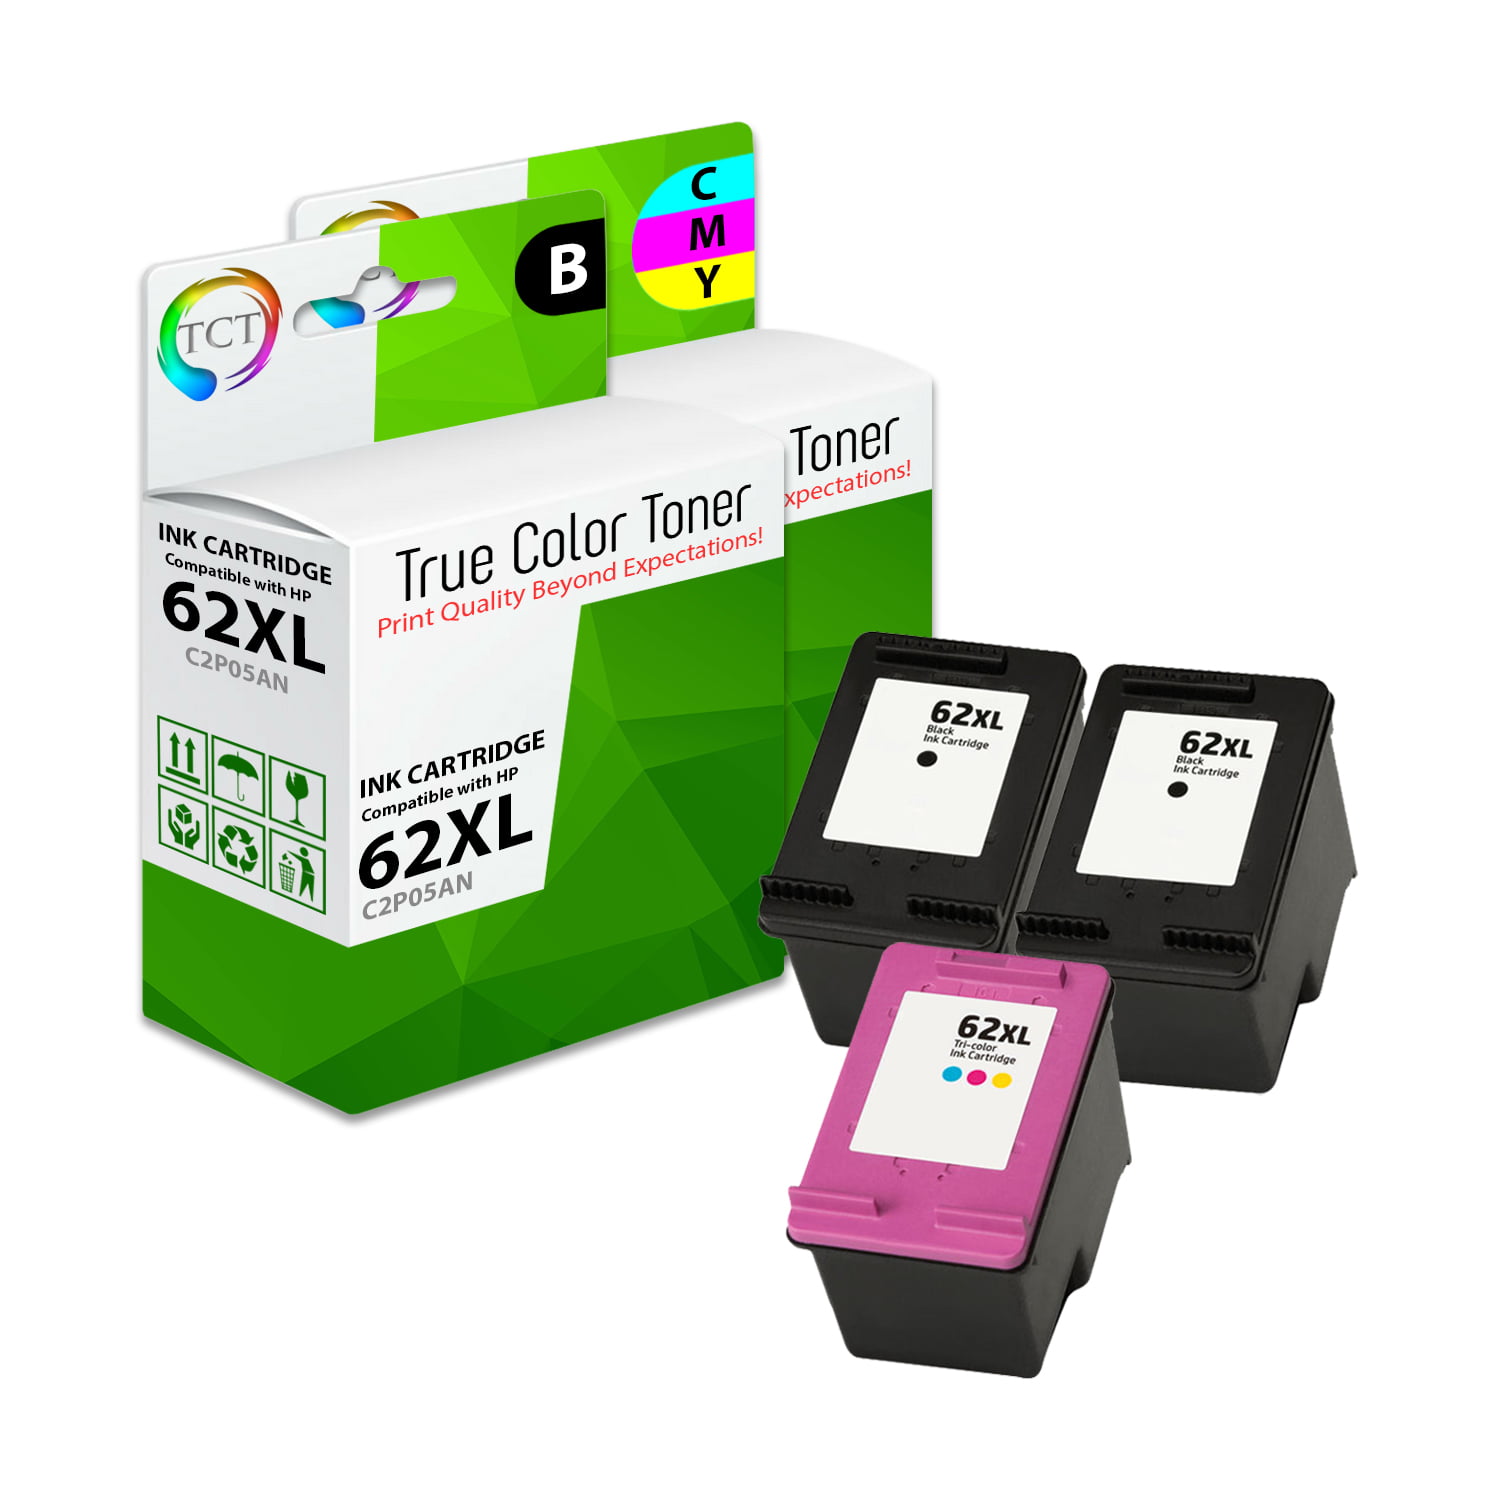 Dood in de wereld Birma fonds TCT Compatible Ink Cartridge Replacement for HP 62XL 62 XL works with HP  Envy 5640 5642 5643, OfficeJet 5745, 5740 Printers (2 Black C2P05AN, 1  Tri-Color C2P07AN) - 3 Pack - Walmart.com